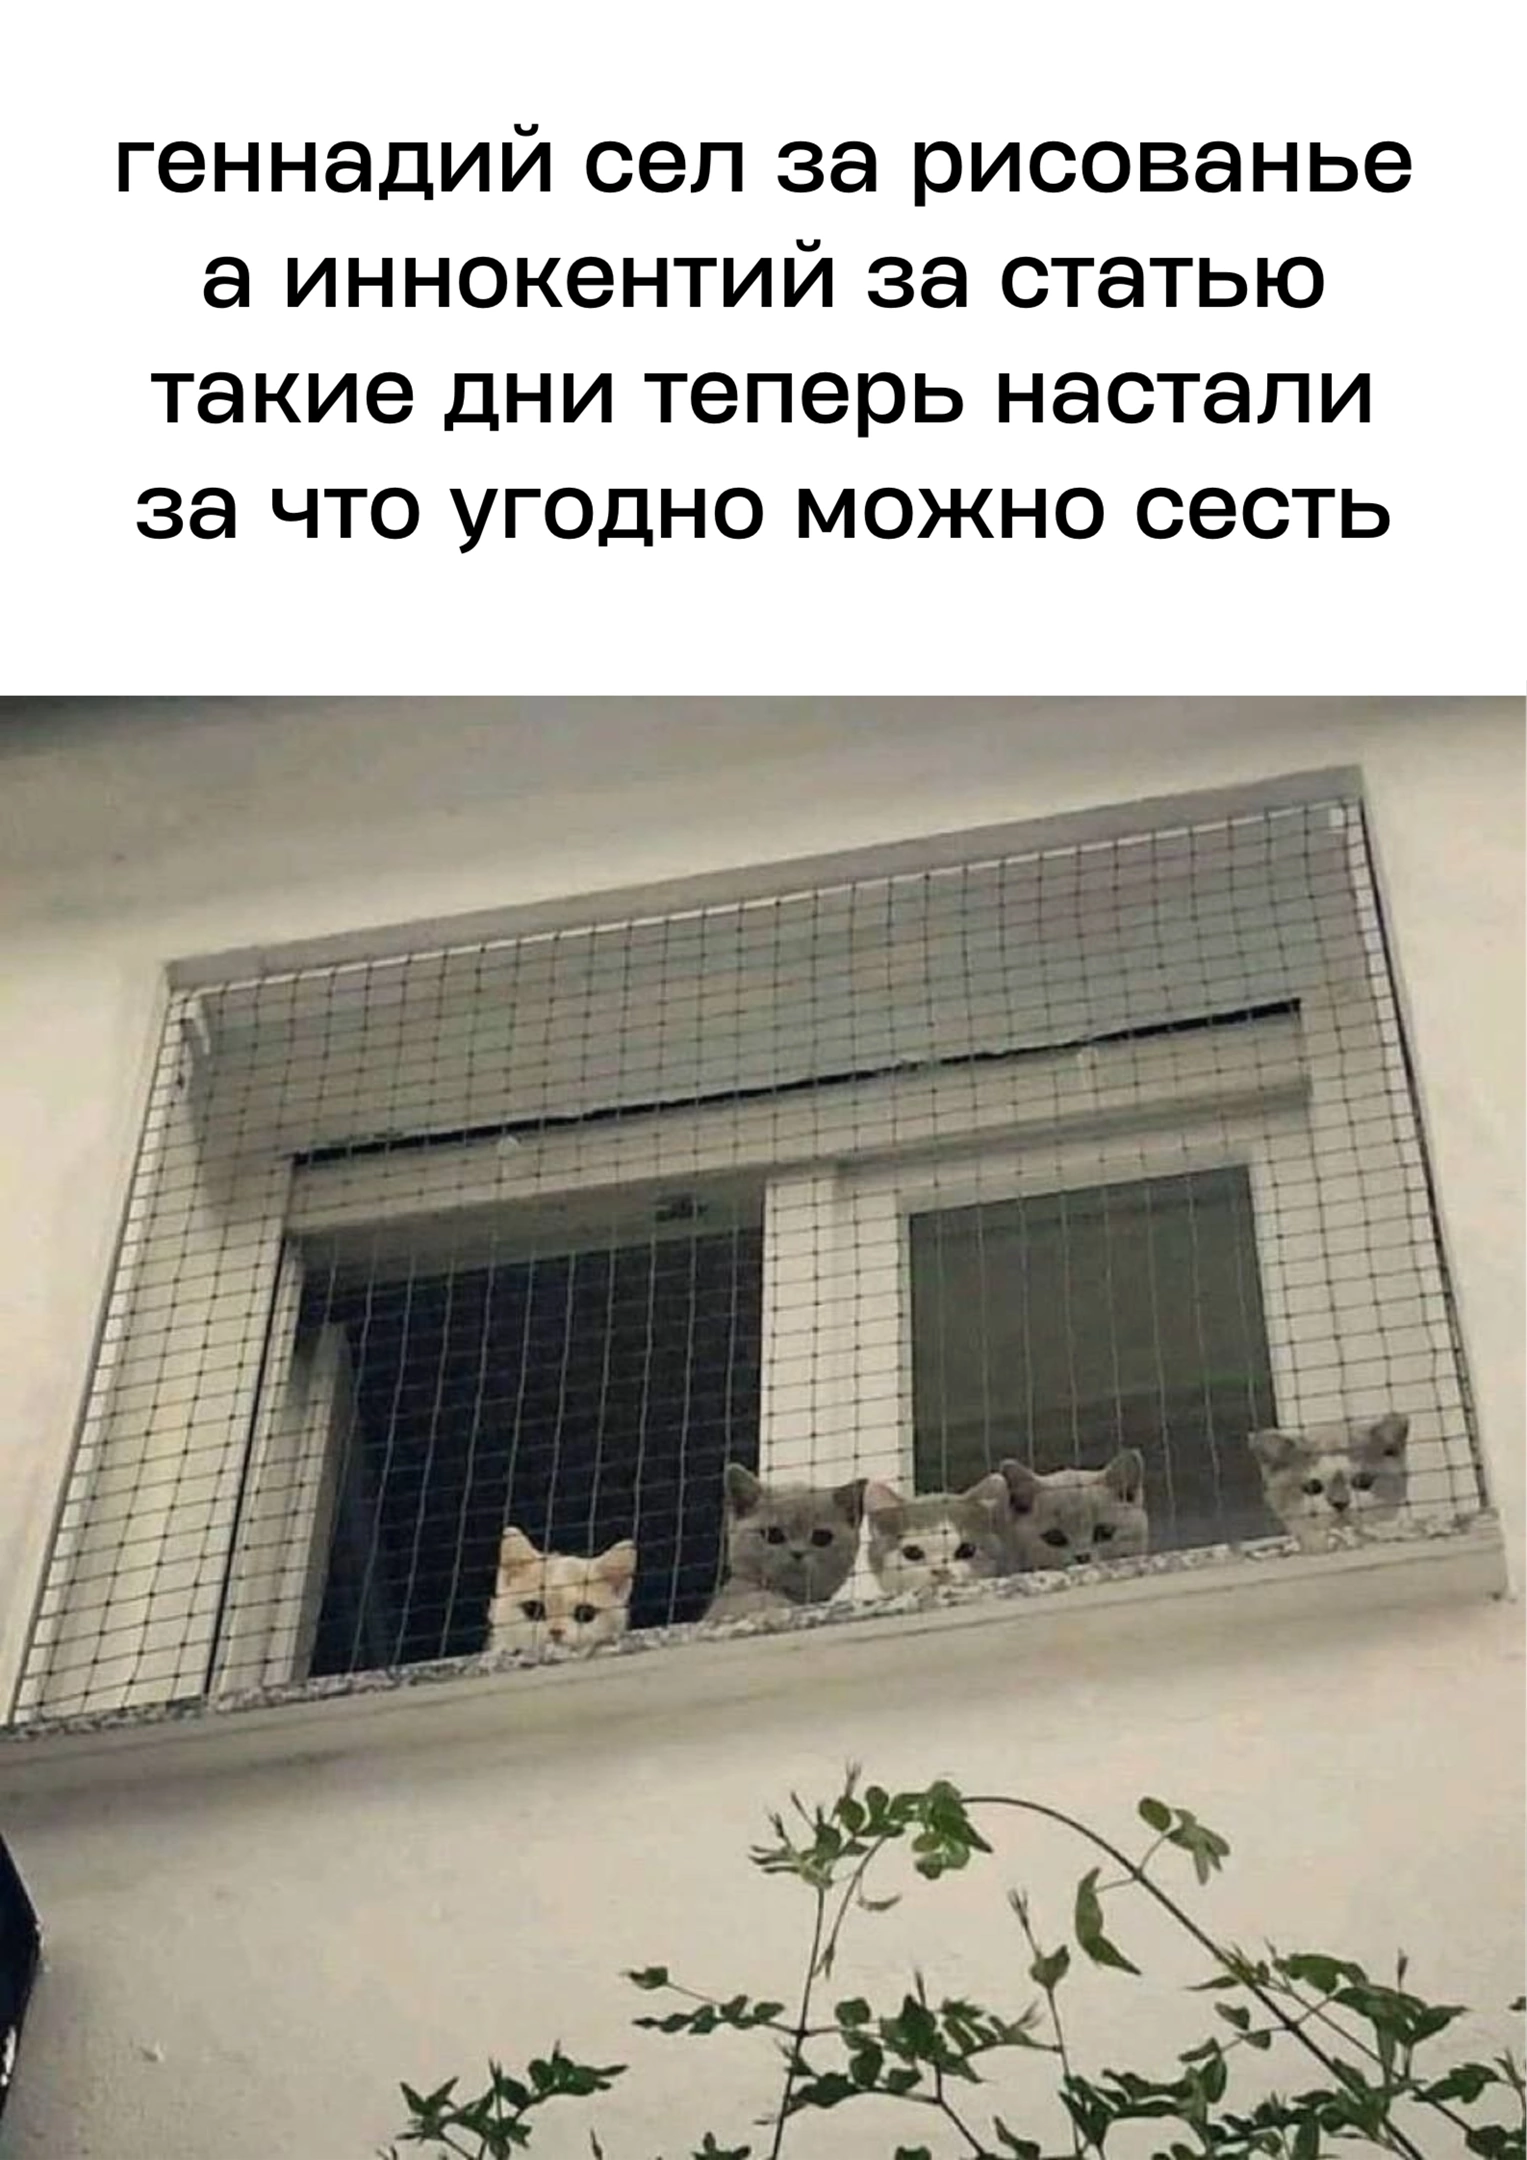 In the house - Kittens, Picture with text